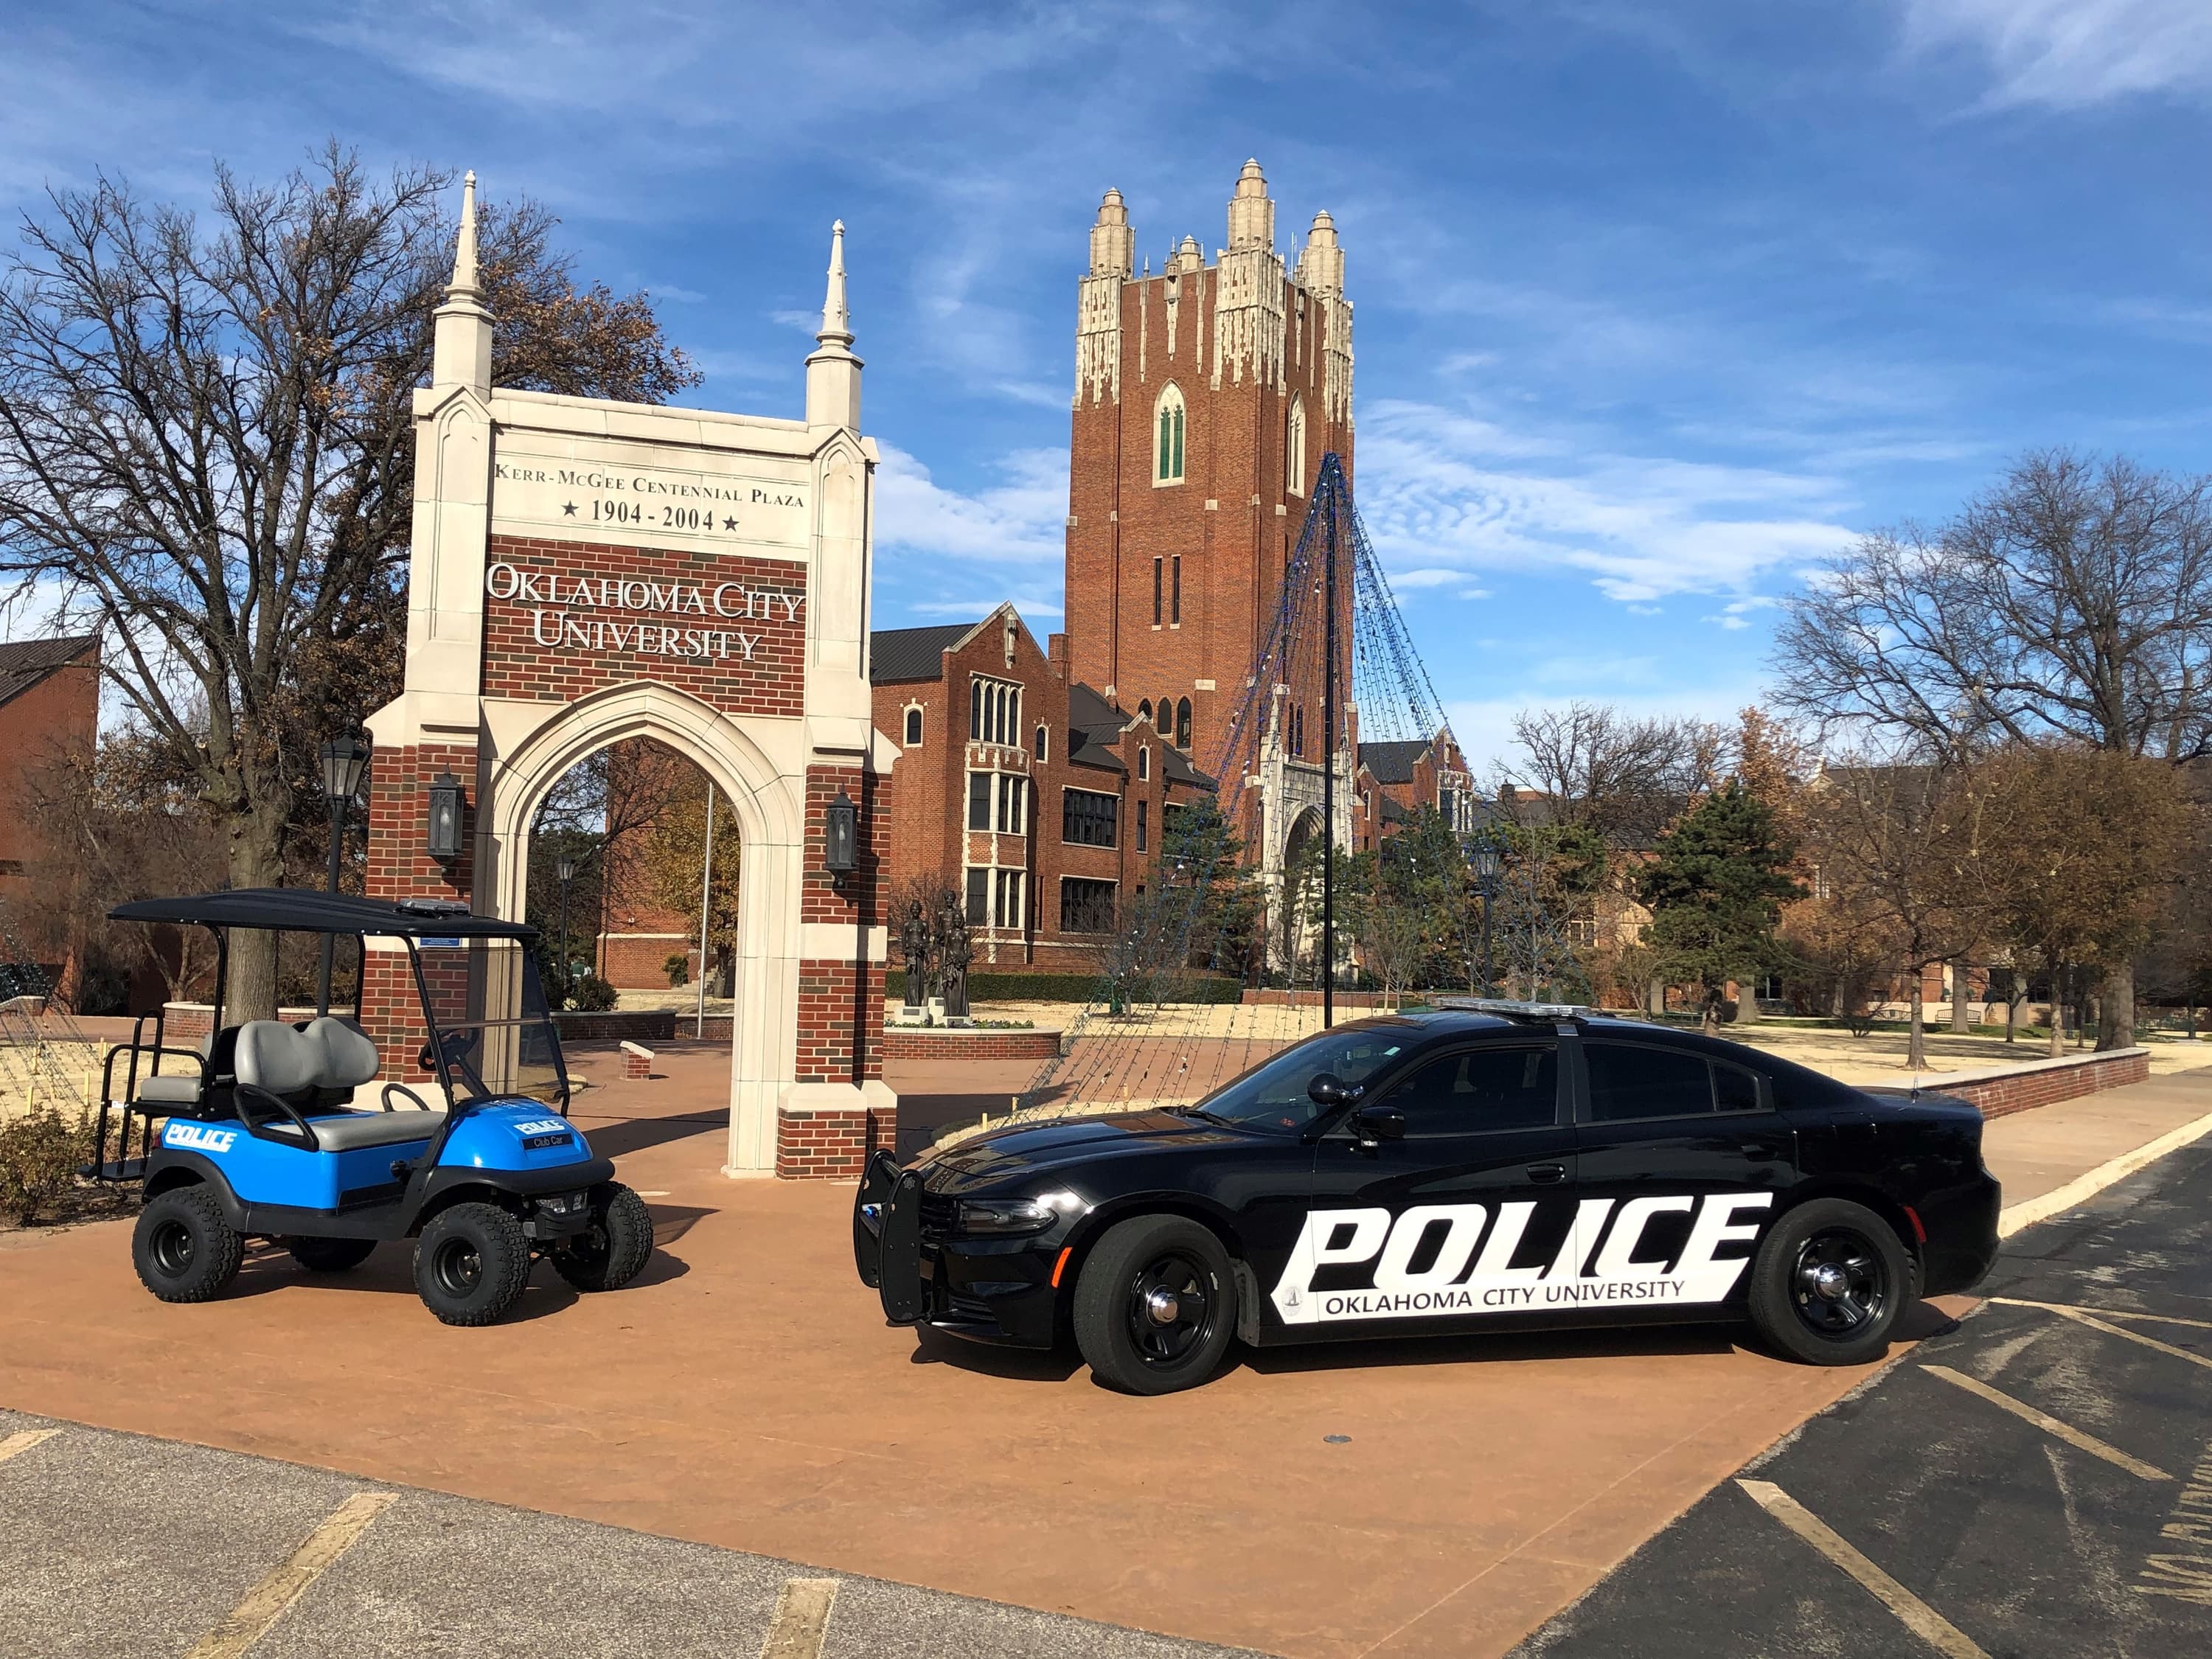 O C U P D vehicles are parked by the campus's entryway